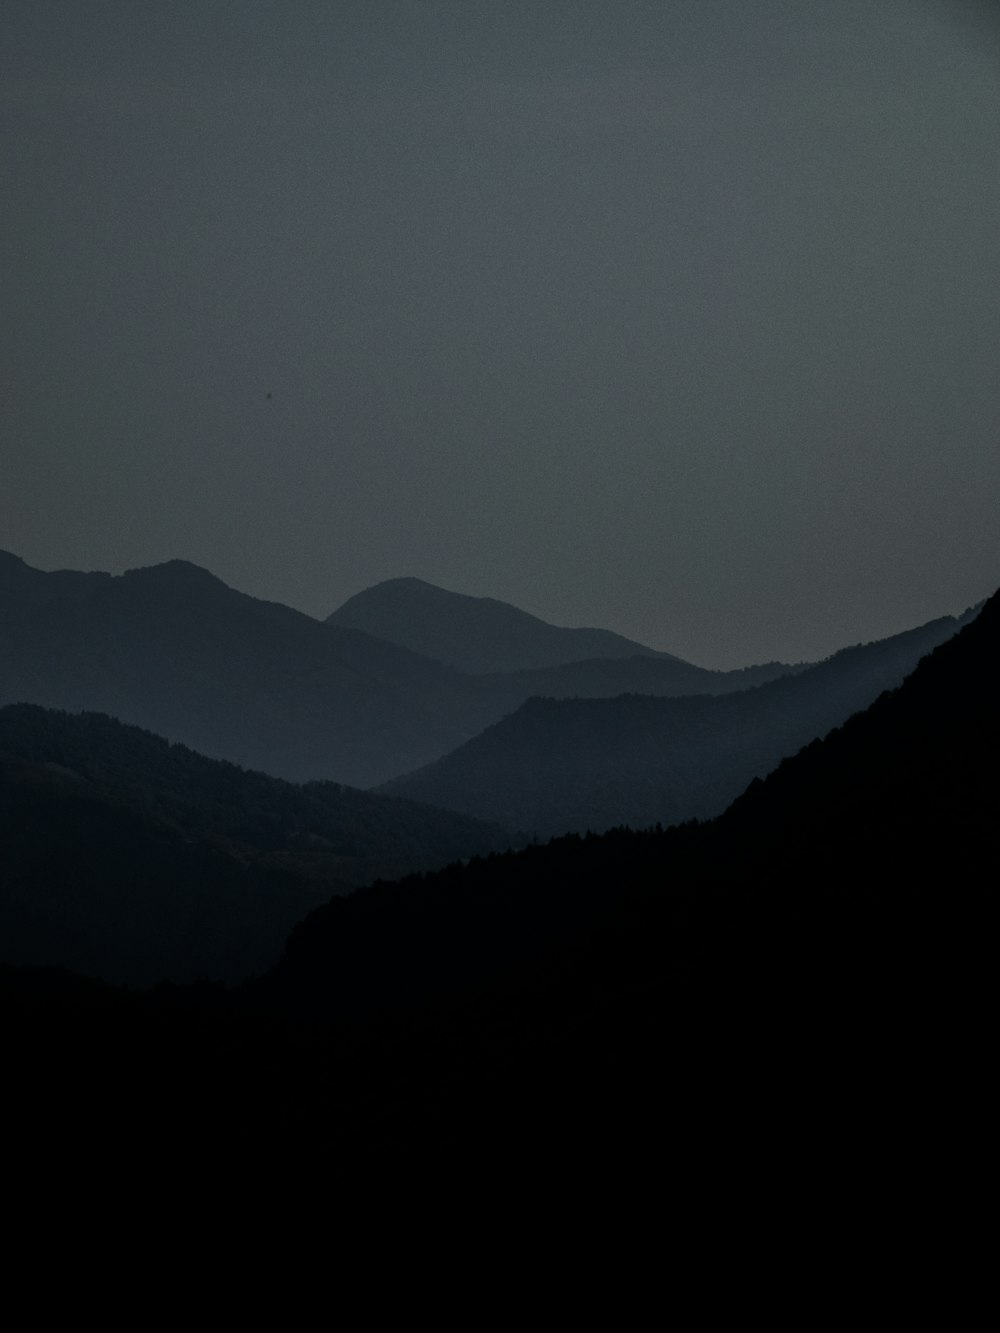 a bird flying over a mountain range at night